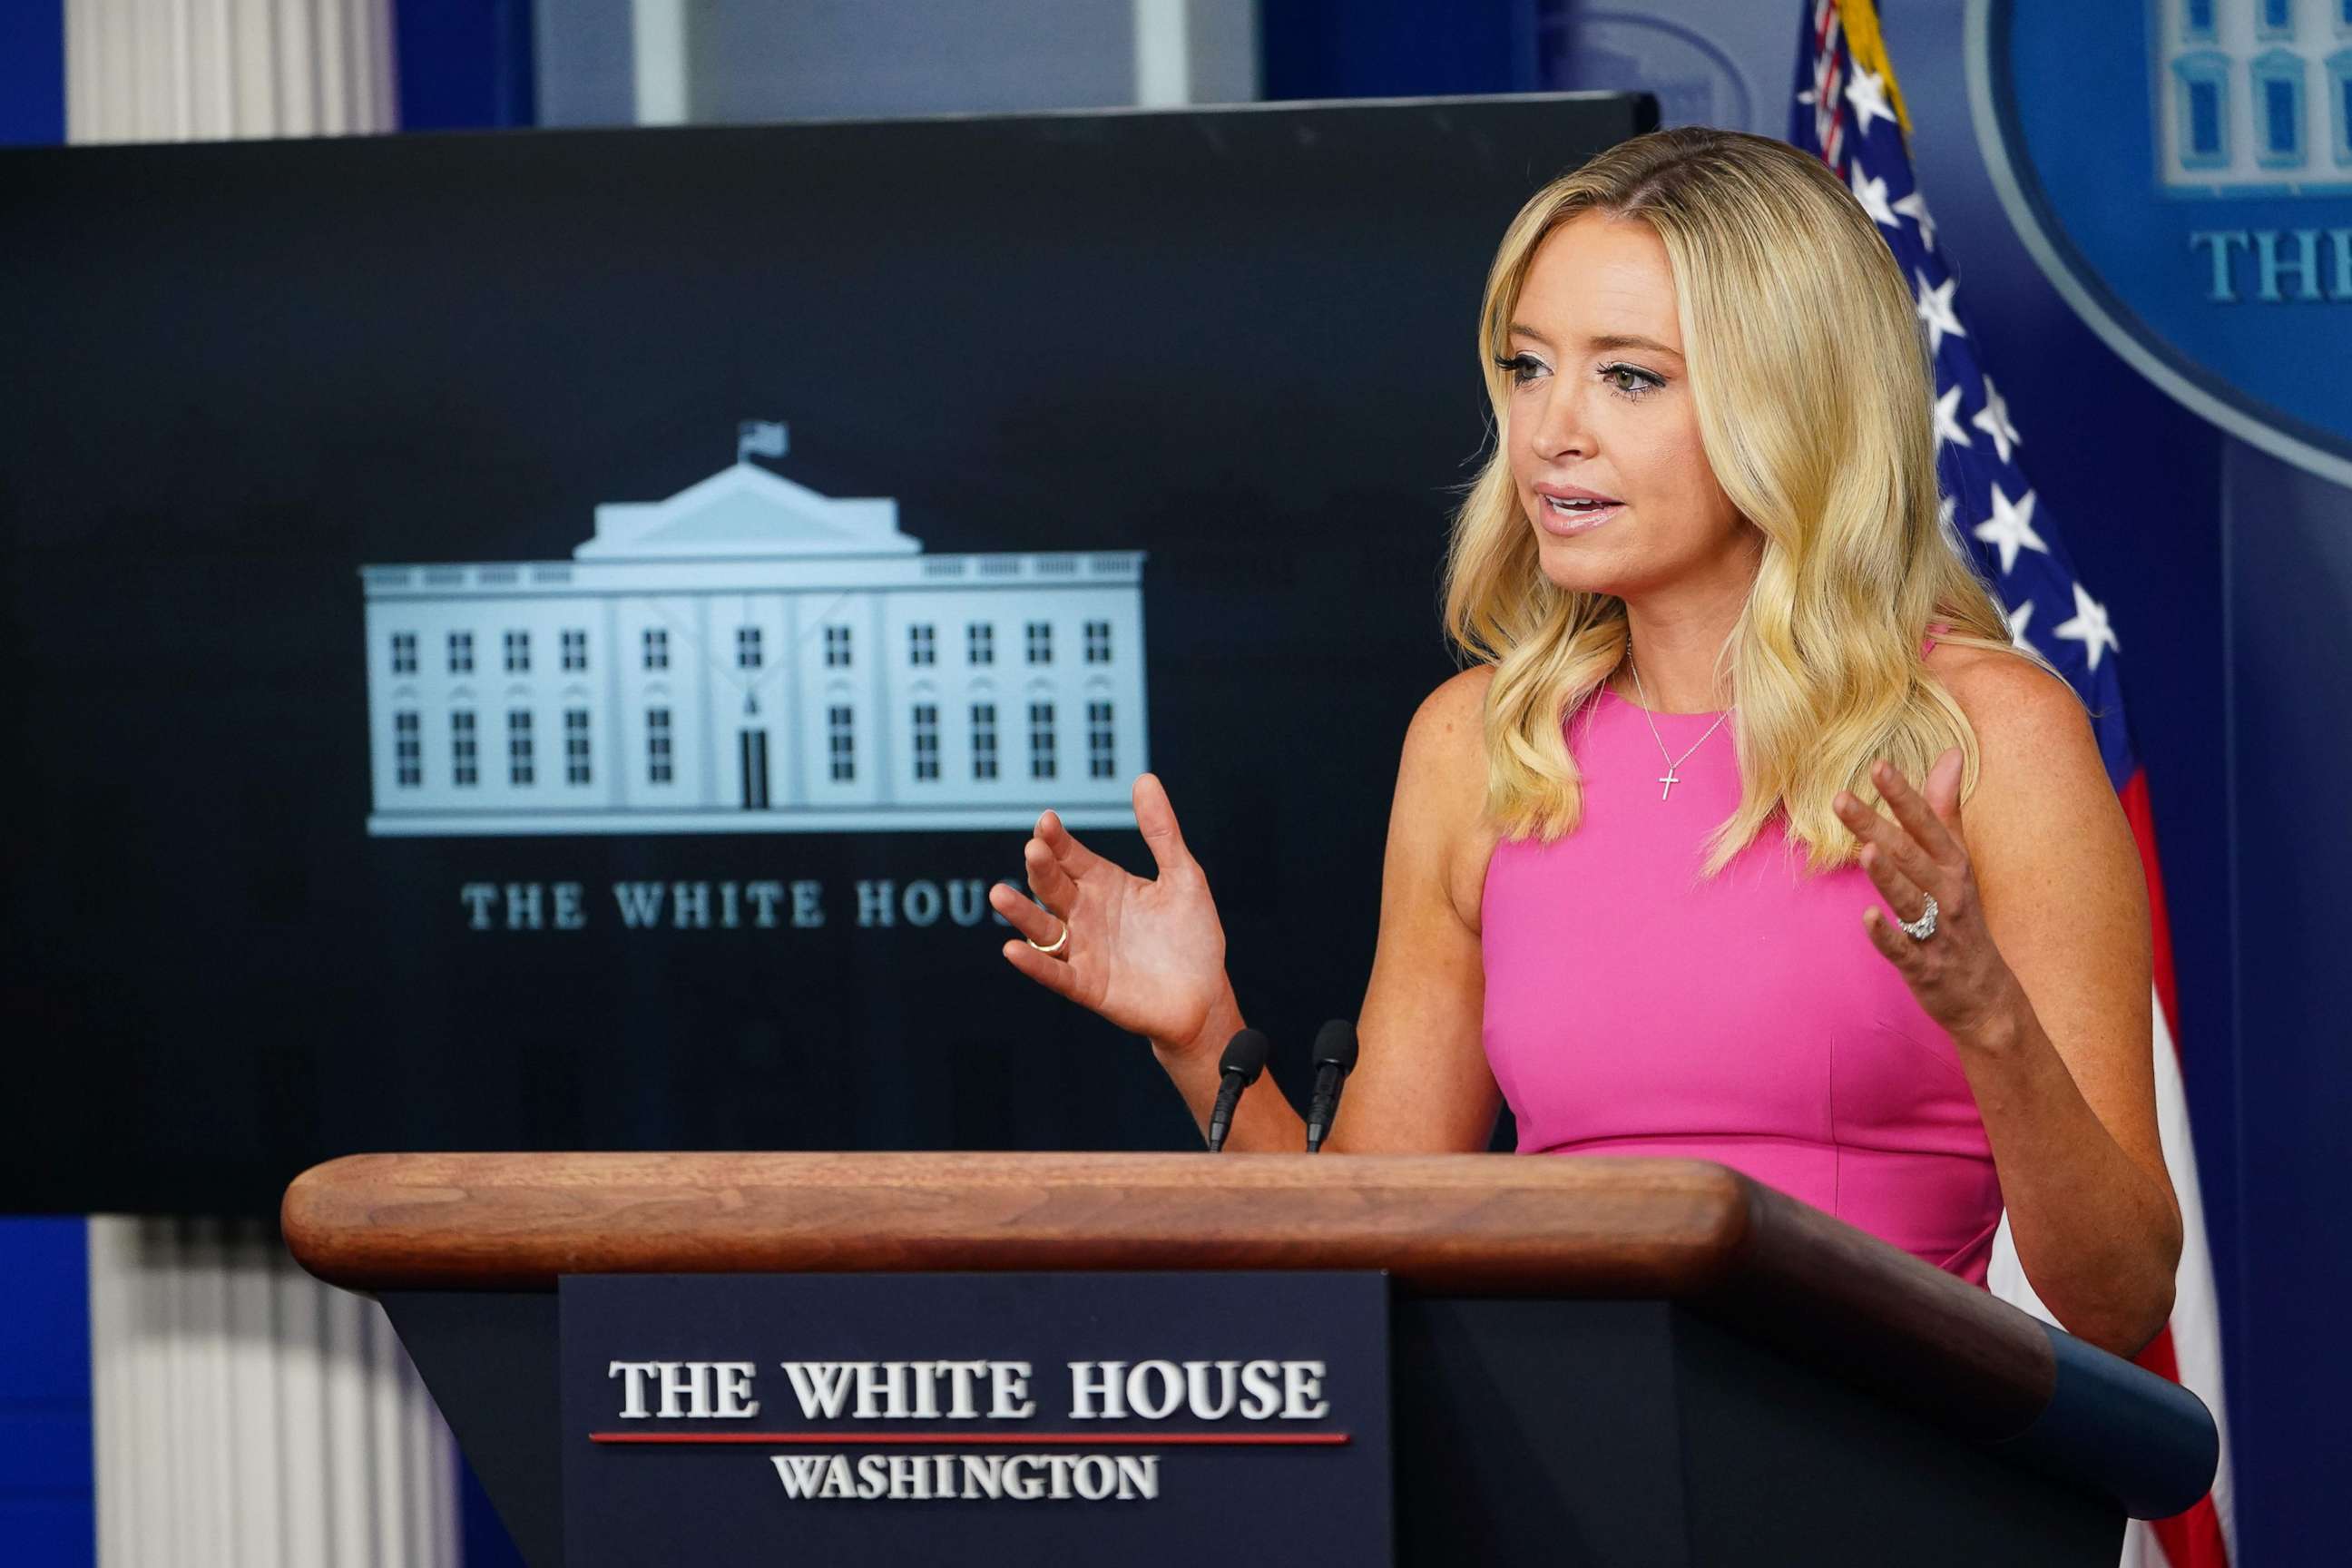 PHOTO: White House Press Secretary Kayleigh McEnany speaks during a briefing in the Brady Briefing Room of the White House in Washington, D.C. on Sept. 9, 2020.